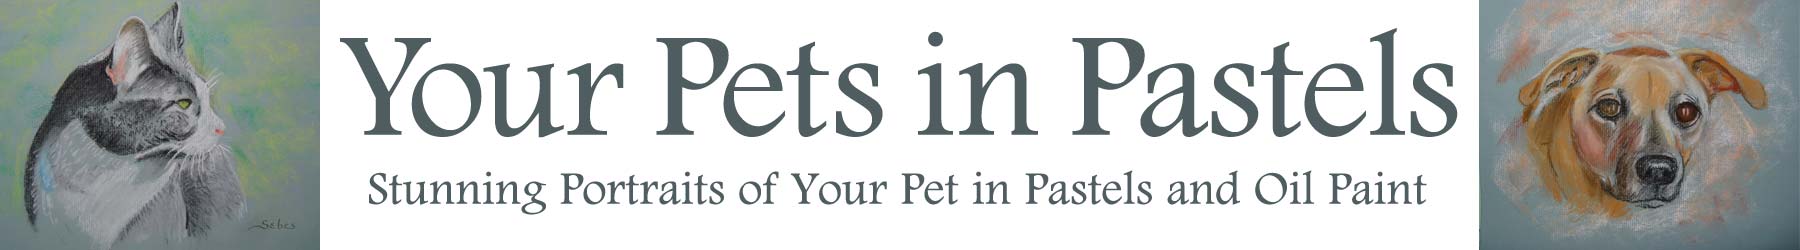 Your Pets in Pastels site header with a pastel portrait of a cat on the left and dog on the right.